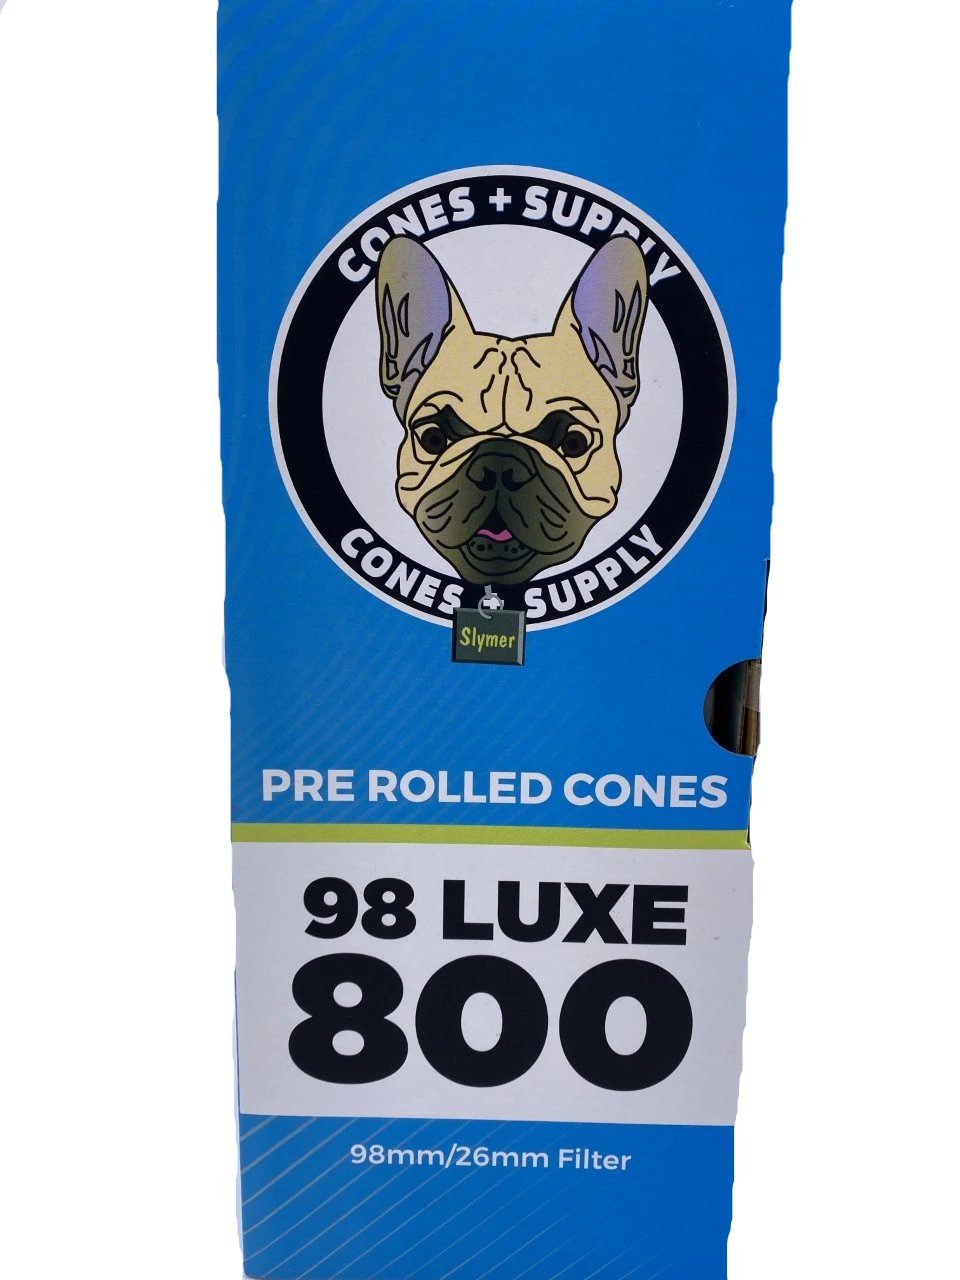 Cones + Supply Classic 98MM Luxe Cones 800 Count Flower Power Packages 